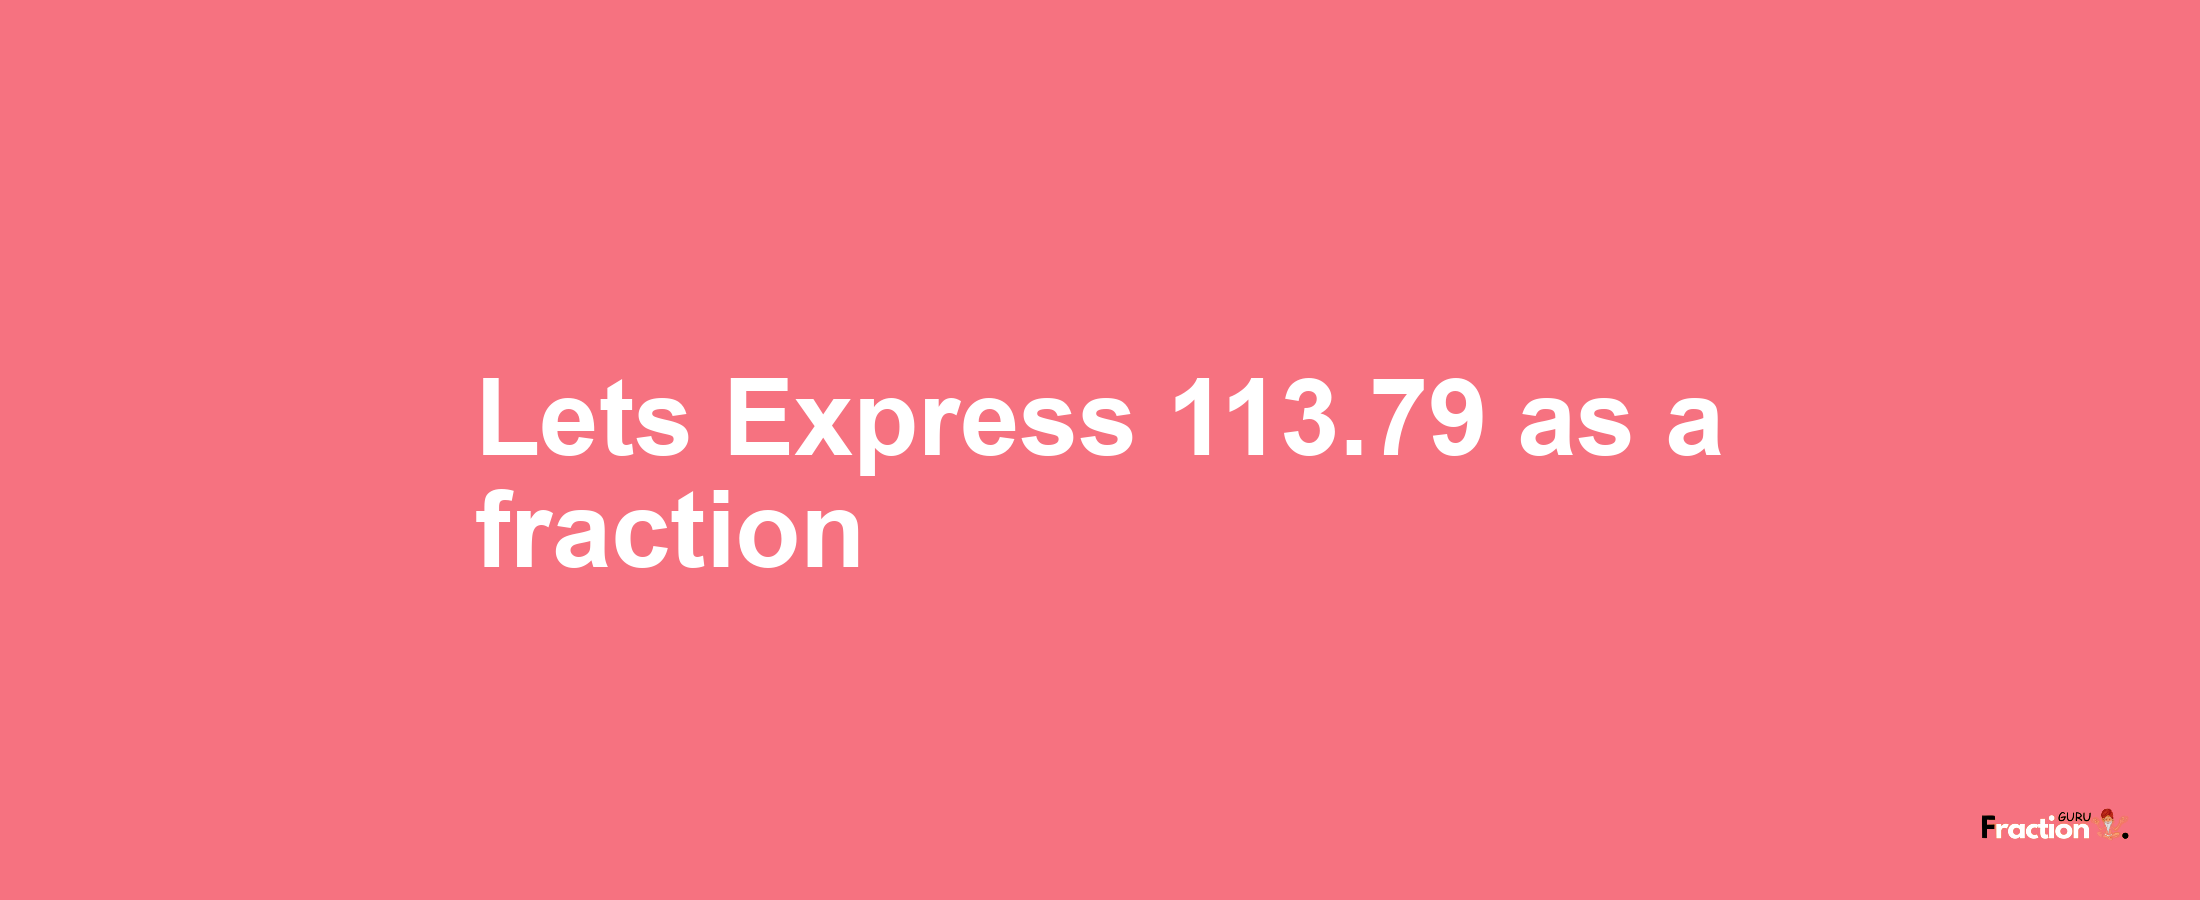 Lets Express 113.79 as afraction